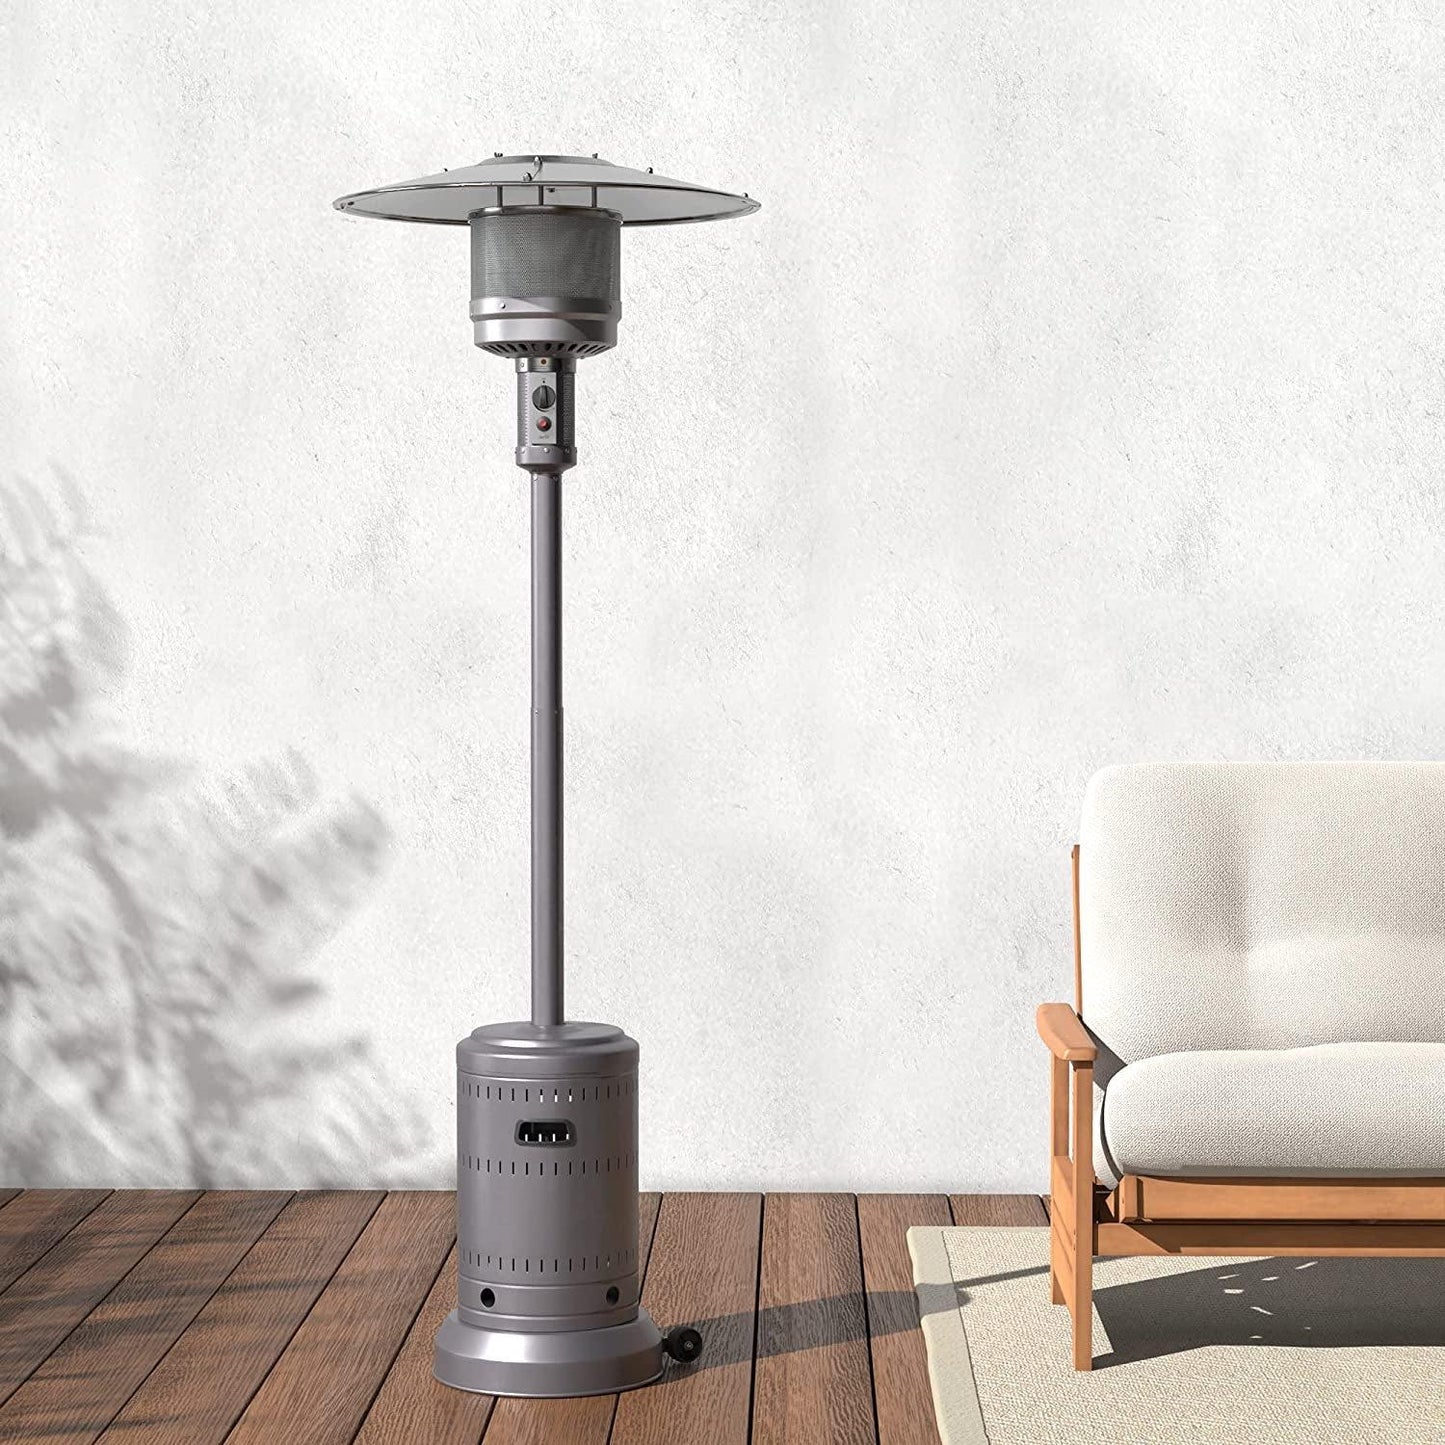 46,000 BTU Outdoor Propane Patio Heater with Wheels, Commercial & Residential - Slate Gray